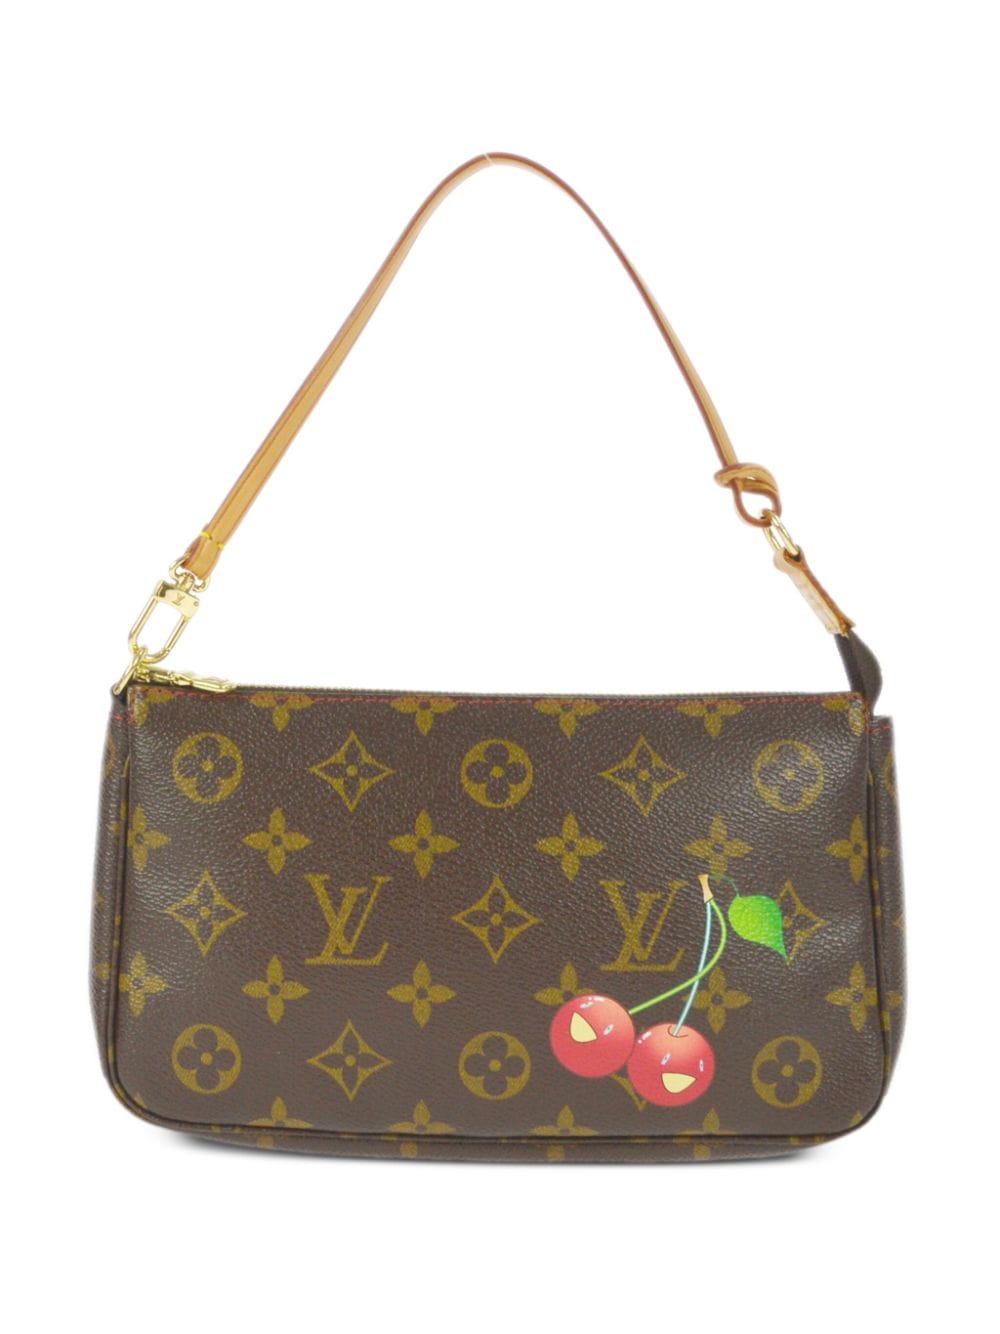 Louis Vuitton LV mother-in-law cylinder bag second-hand Japanese  second-hand Vintage - Shop RARE TO GO Handbags & Totes - Pinkoi